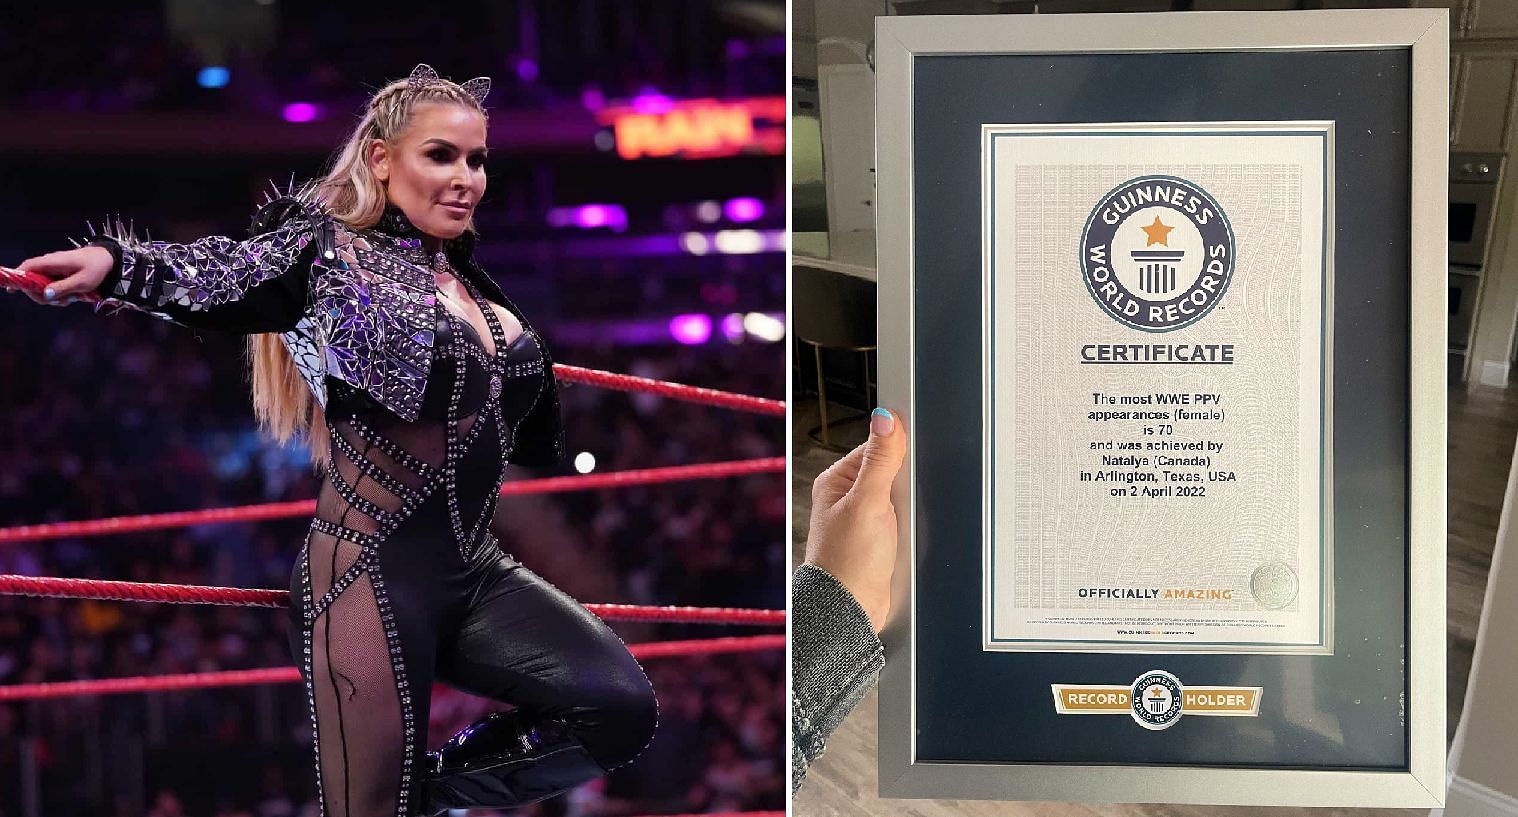 Natalya is a three-time Guinness World Record owner in her career